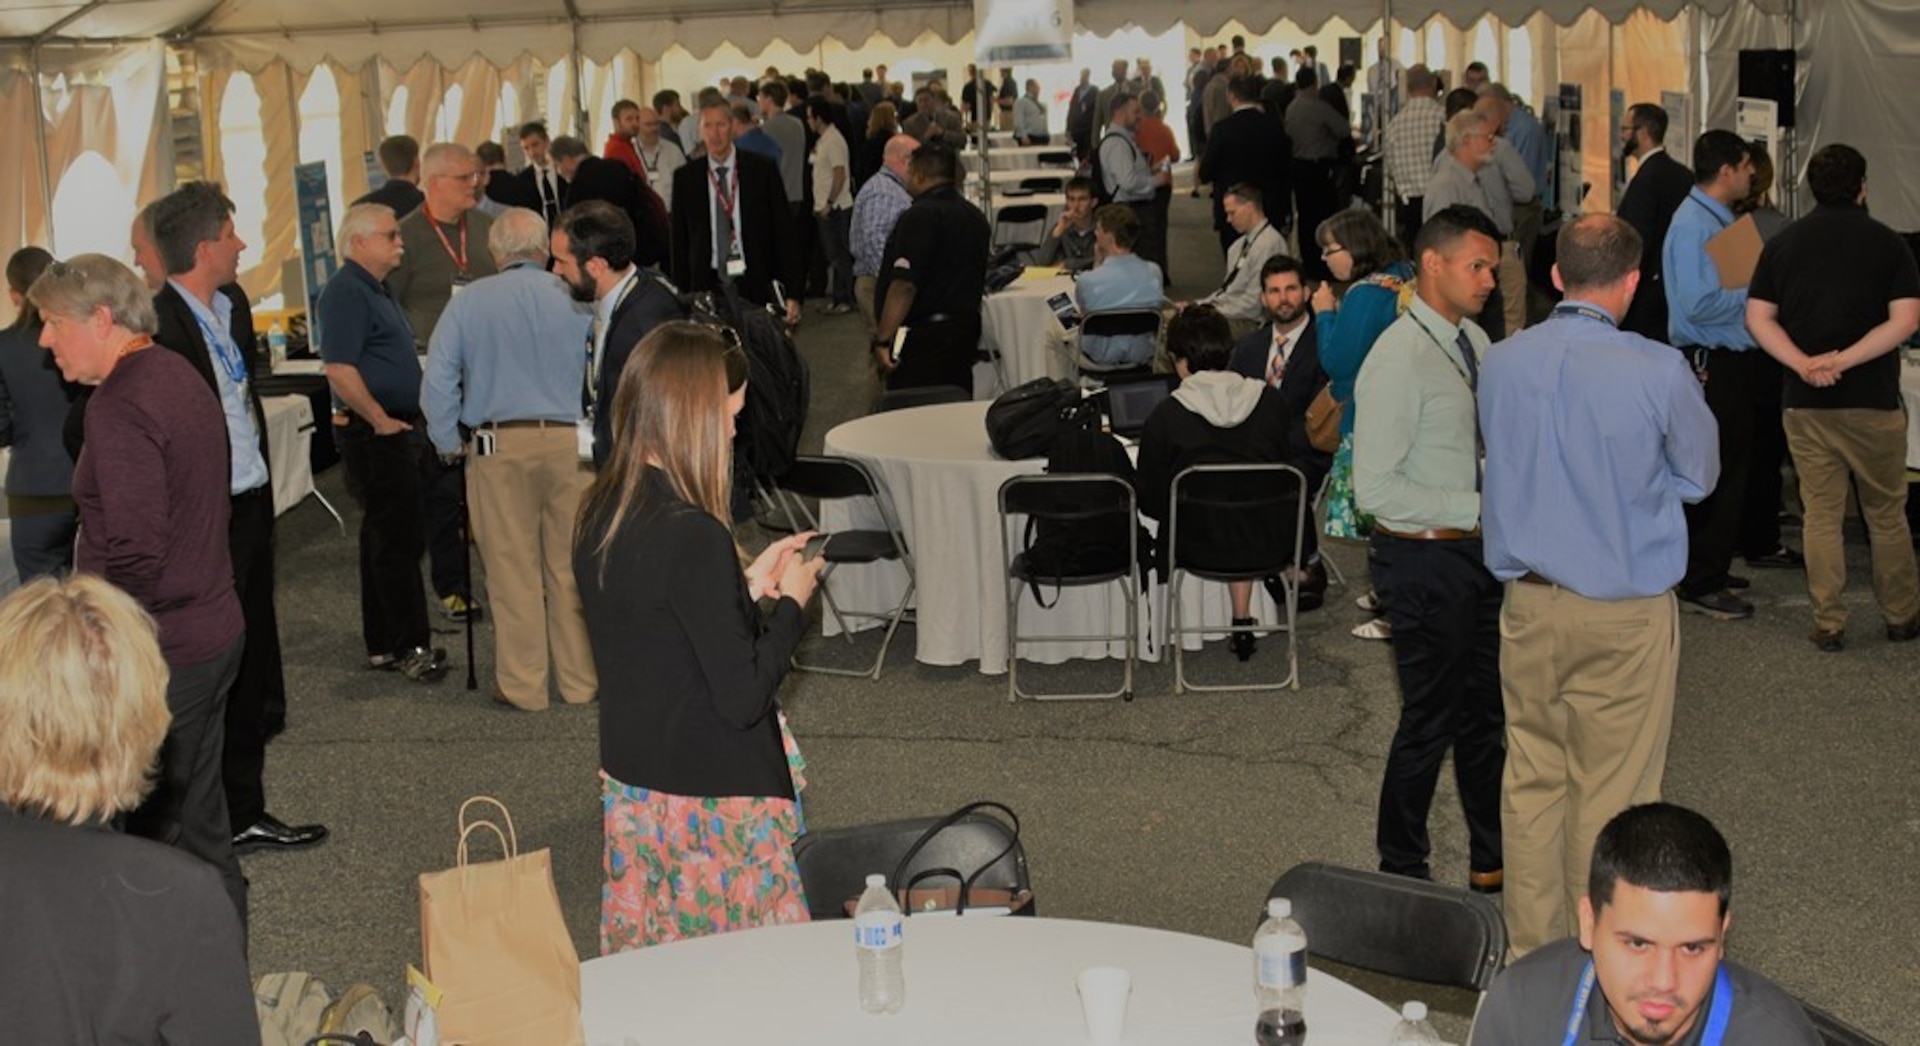 IMAGE: DAHLGREN, Va. (May 2, 2018) - Naval Research and Development Establishment (NR&DE) scientists and engineers present more than 150 technological projects at the two-day 2018 Naval Innovative Science and Engineering (NISE) Technical Exchange Meeting held at Naval Surface Warfare Center Dahlgren Division. The audience - a who's who in Department of Defense technical leaders, scientists and engineers - arrived at the Deputy Assistant Secretary of Defense for Research, Development, Test and Evaluation sponsored event to see and learn about the NISE projects and their alignment to naval systems and naval needs. (U.S. Navy photo/Released)